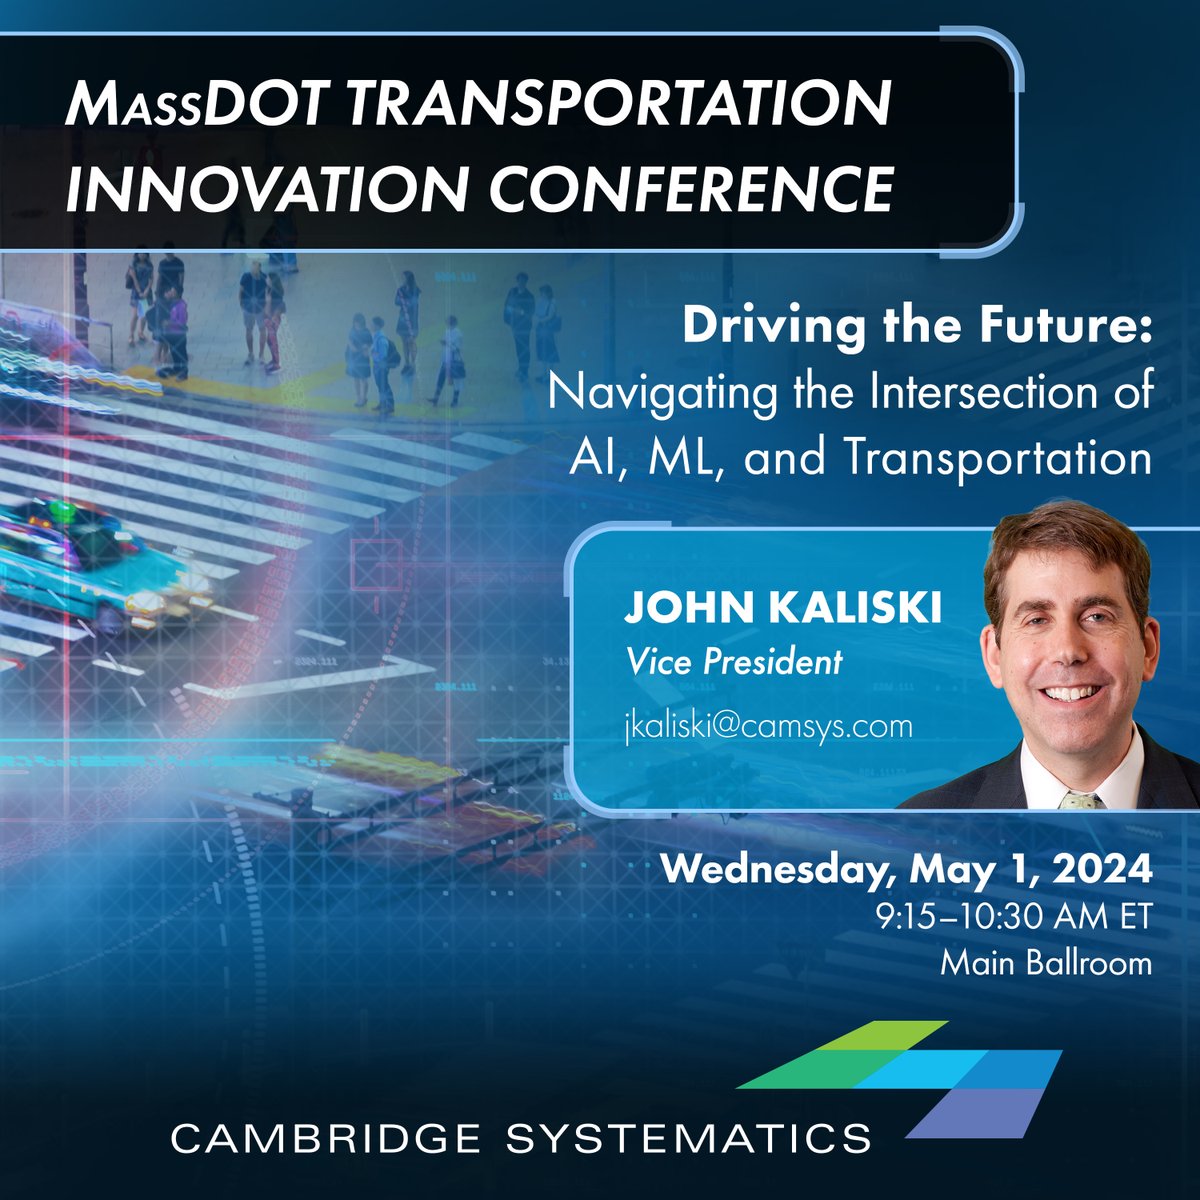 Hear from John Kaliski on the transformative impact of AI across the transportation sector and learn about the opportunities and risks of using AI in planning. Thanks @MassDOT for the opportunity to support and sponsor this conference!